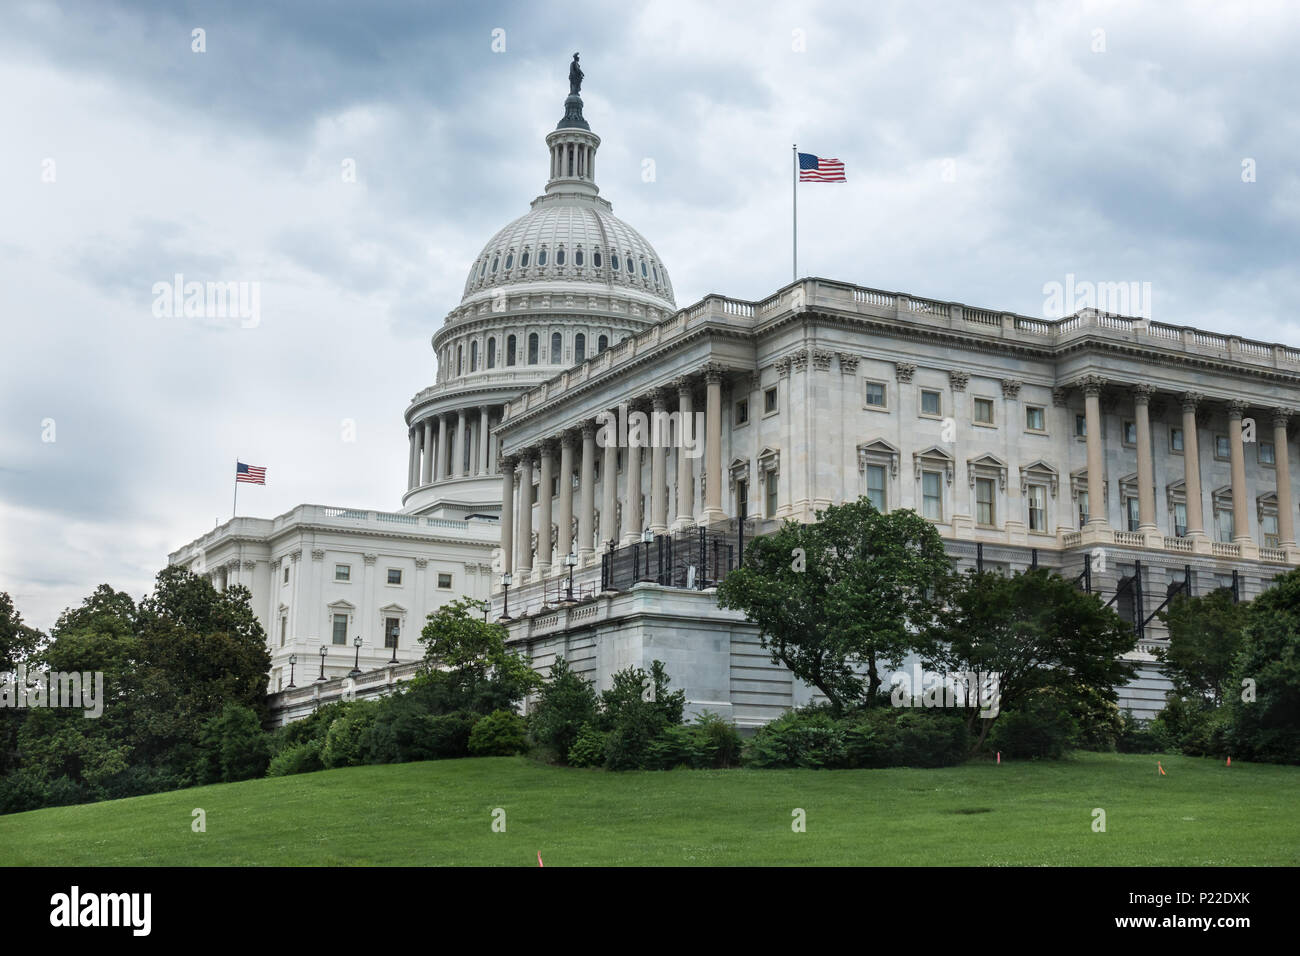 West side US Capitol building under threatening skies. Flags flying in serious wind, daylight waning, democracy dies in darkness. Stock Photo